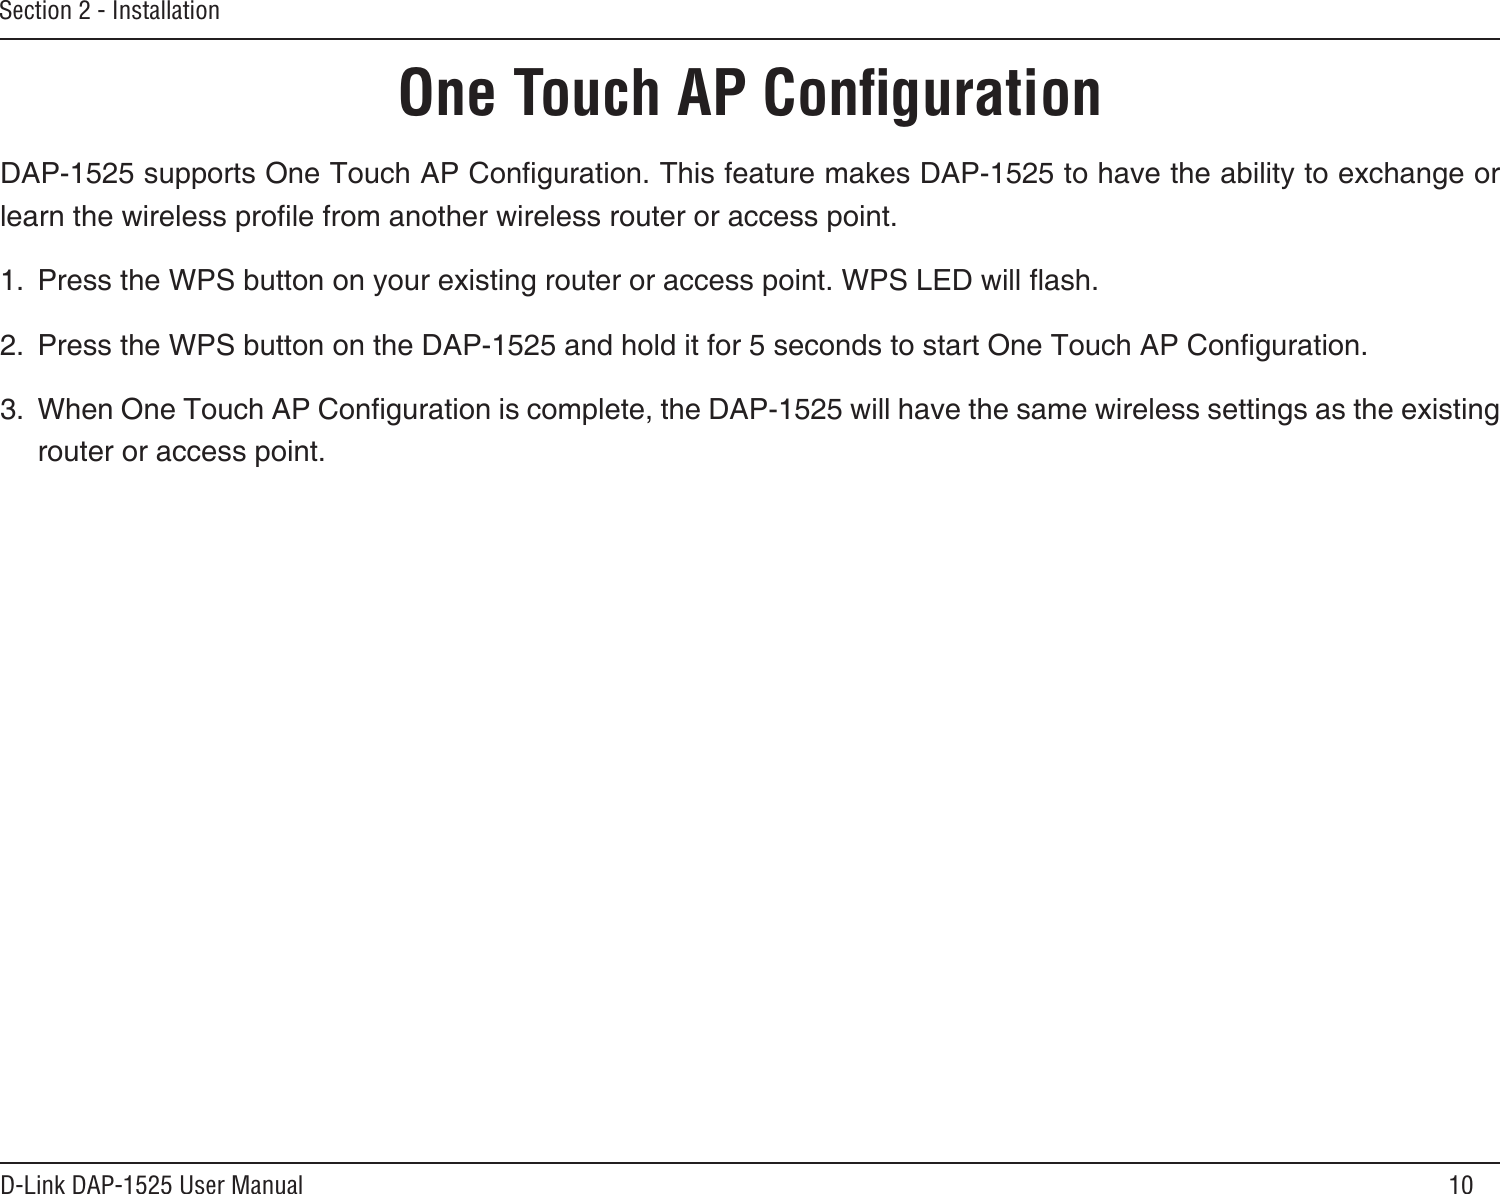 10D-Link DAP-1525 User ManualSection 2 - InstallationOne Touch AP ConﬁgurationDAP-1525 supports One Touch AP Conguration. This feature makes DAP-1525 to have the ability to exchange or learn the wireless prole from another wireless router or access point.1.  Press the WPS button on your existing router or access point. WPS LED will ash.2.  Press the WPS button on the DAP-1525 and hold it for 5 seconds to start One Touch AP Conguration.3.  When One Touch AP Conguration is complete, the DAP-1525 will have the same wireless settings as the existing router or access point.